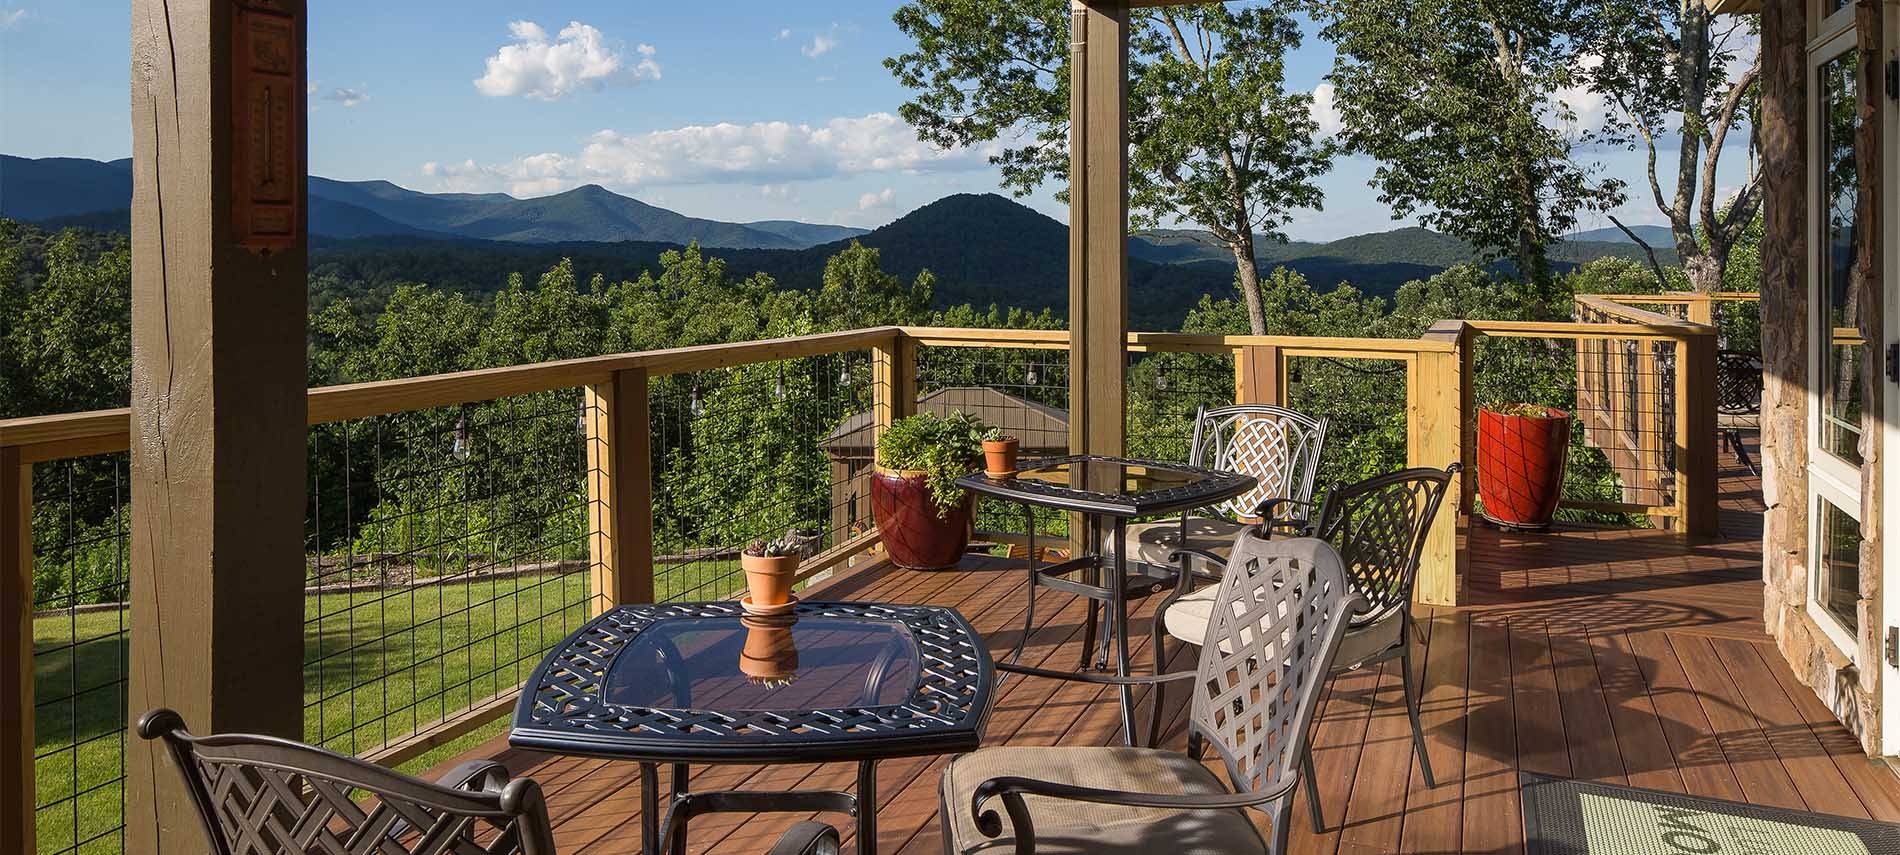 Outdoor patio with reflective dining tables, overlooking a scenic mountain view with sparse clouds dotting the sky.